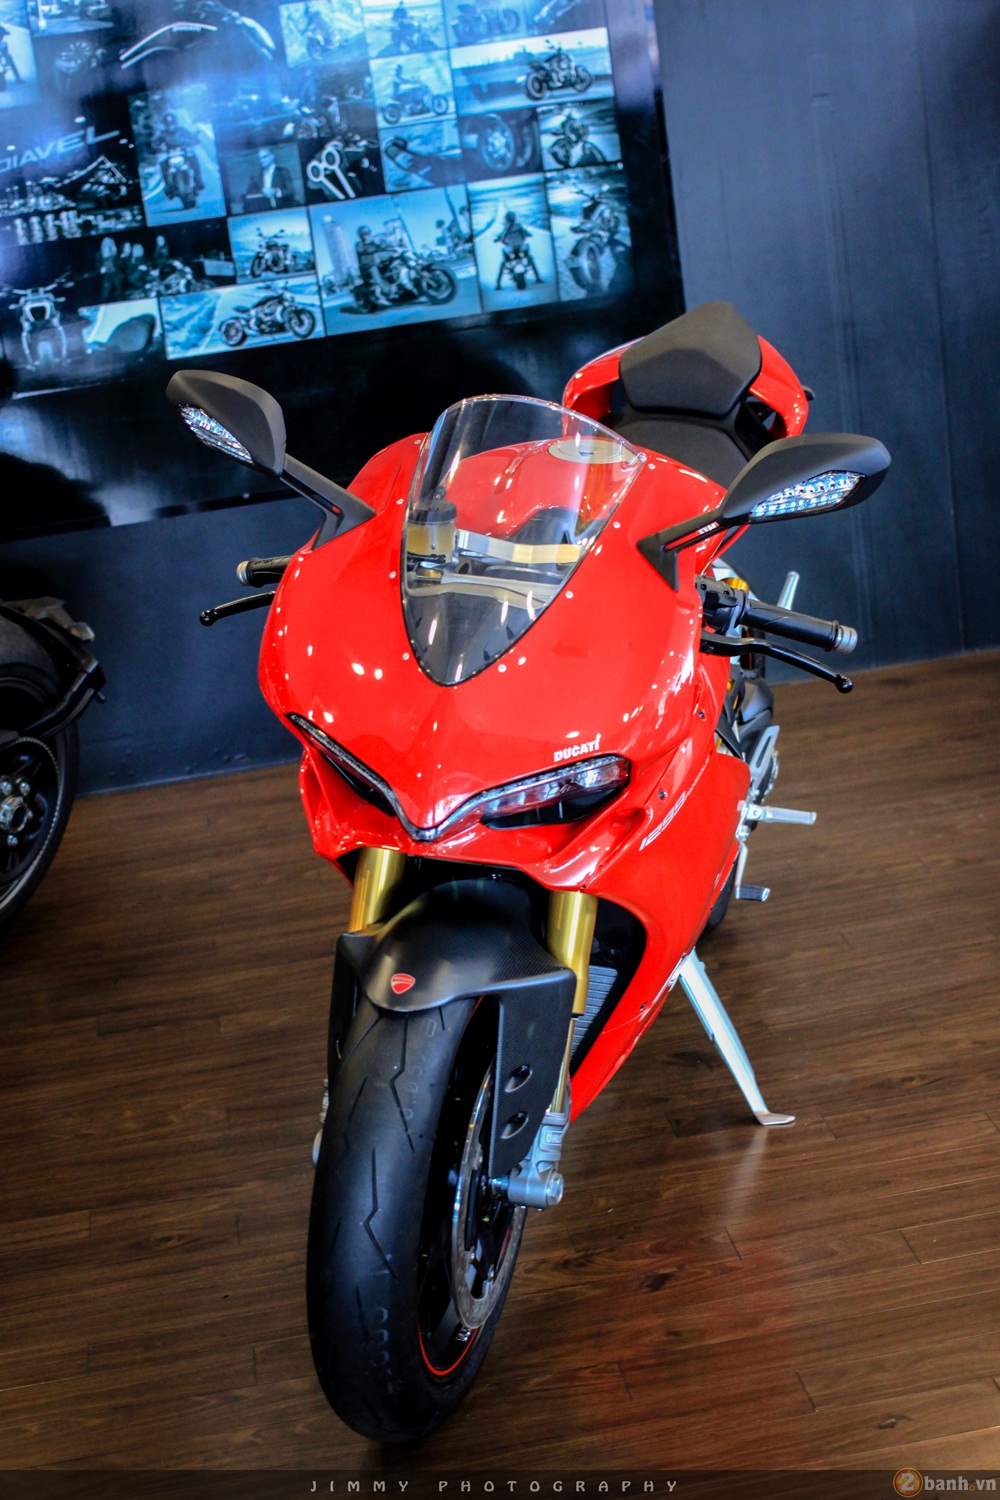 Chan dai Italy 1299 Panigale S chiec Super Sport gon nhe nhat hien nay - 7